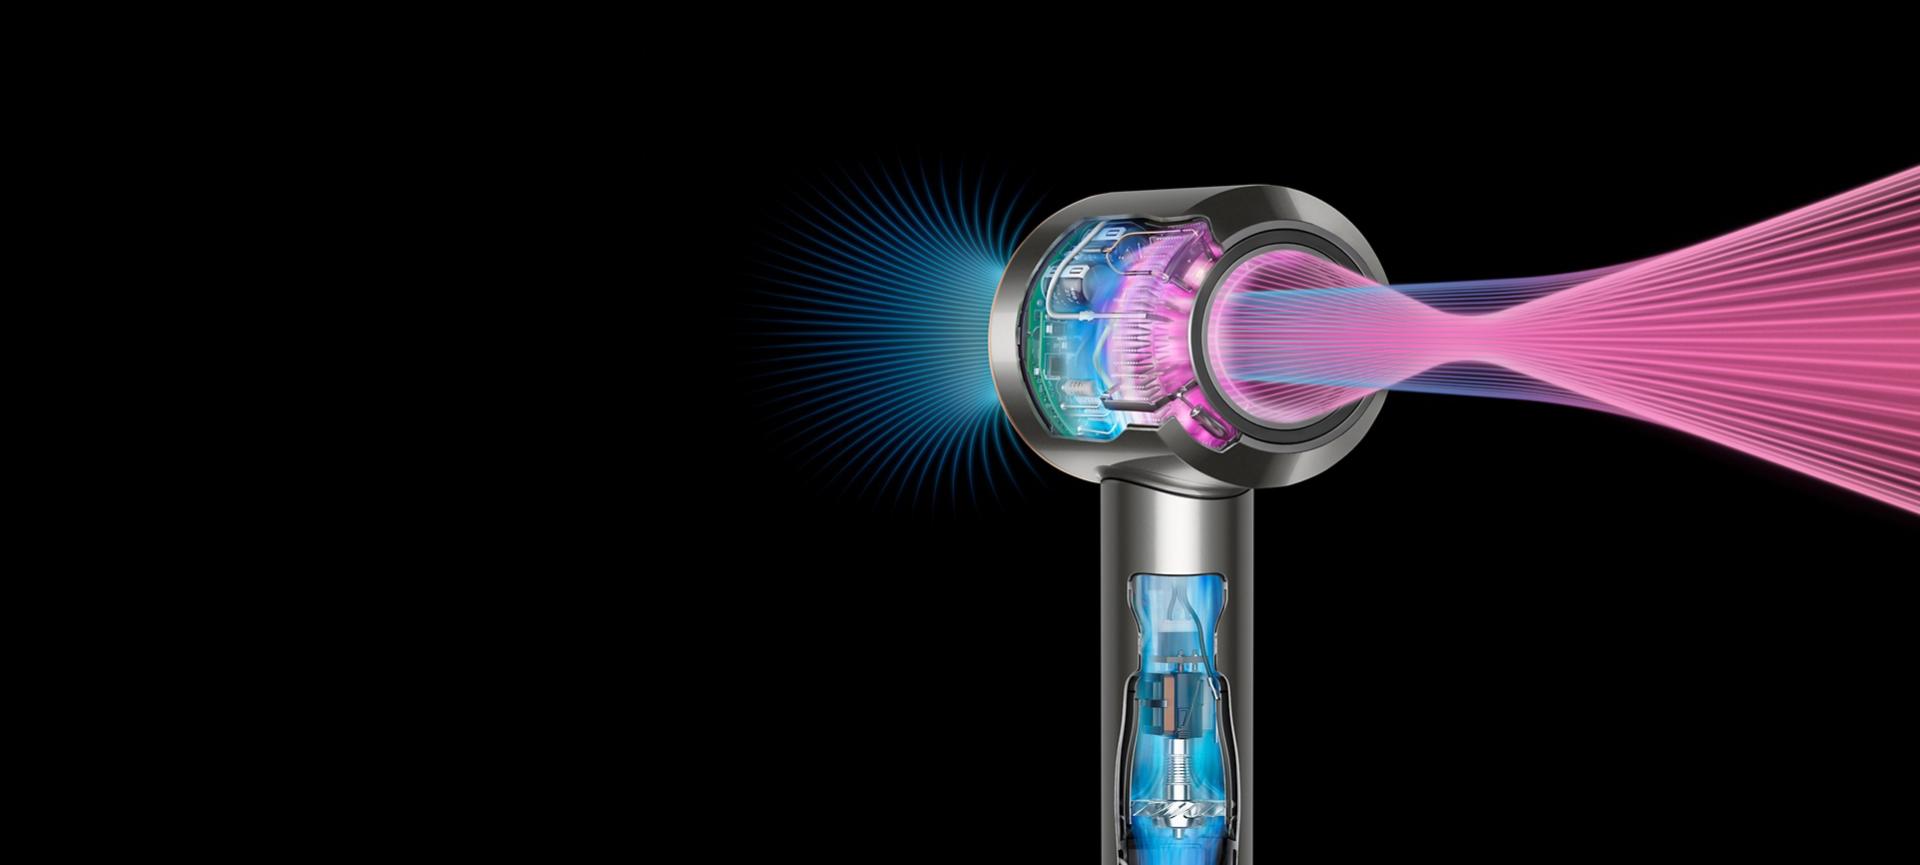 Cutaway computer image of airflow through the Dyson Supersonic hair dryer